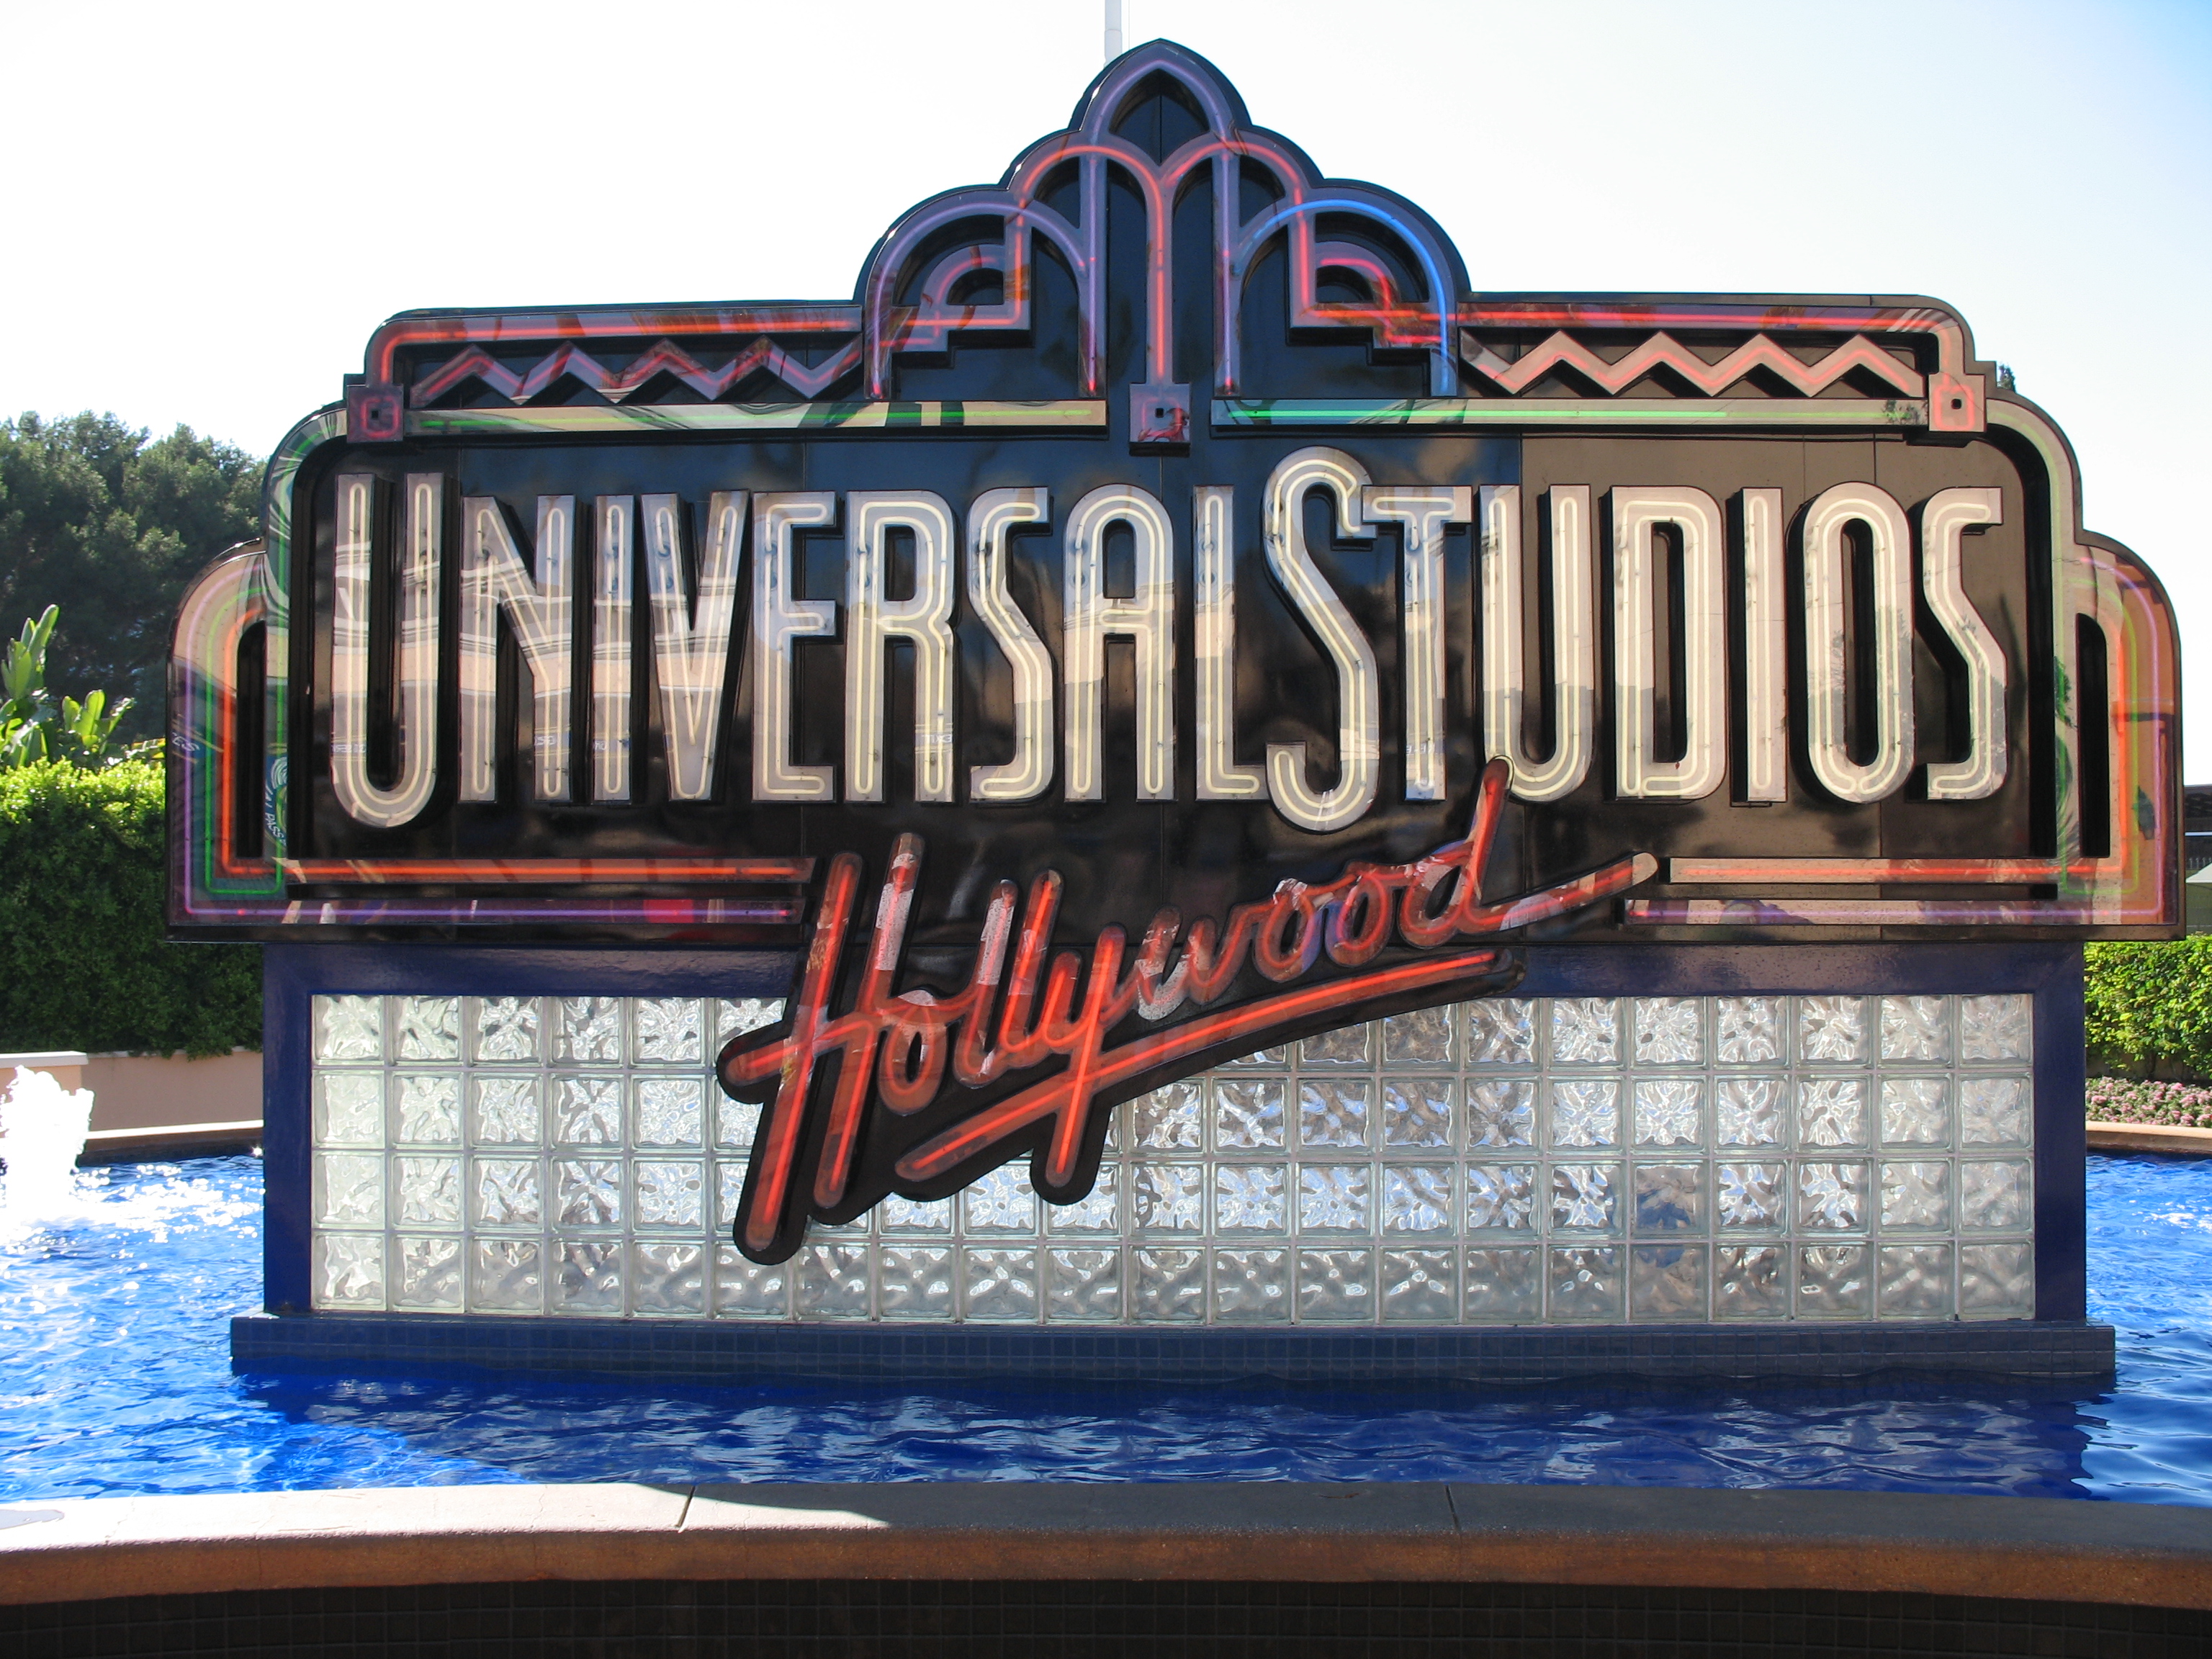 Things to Do In Southern California: Universal Studios Hollywood